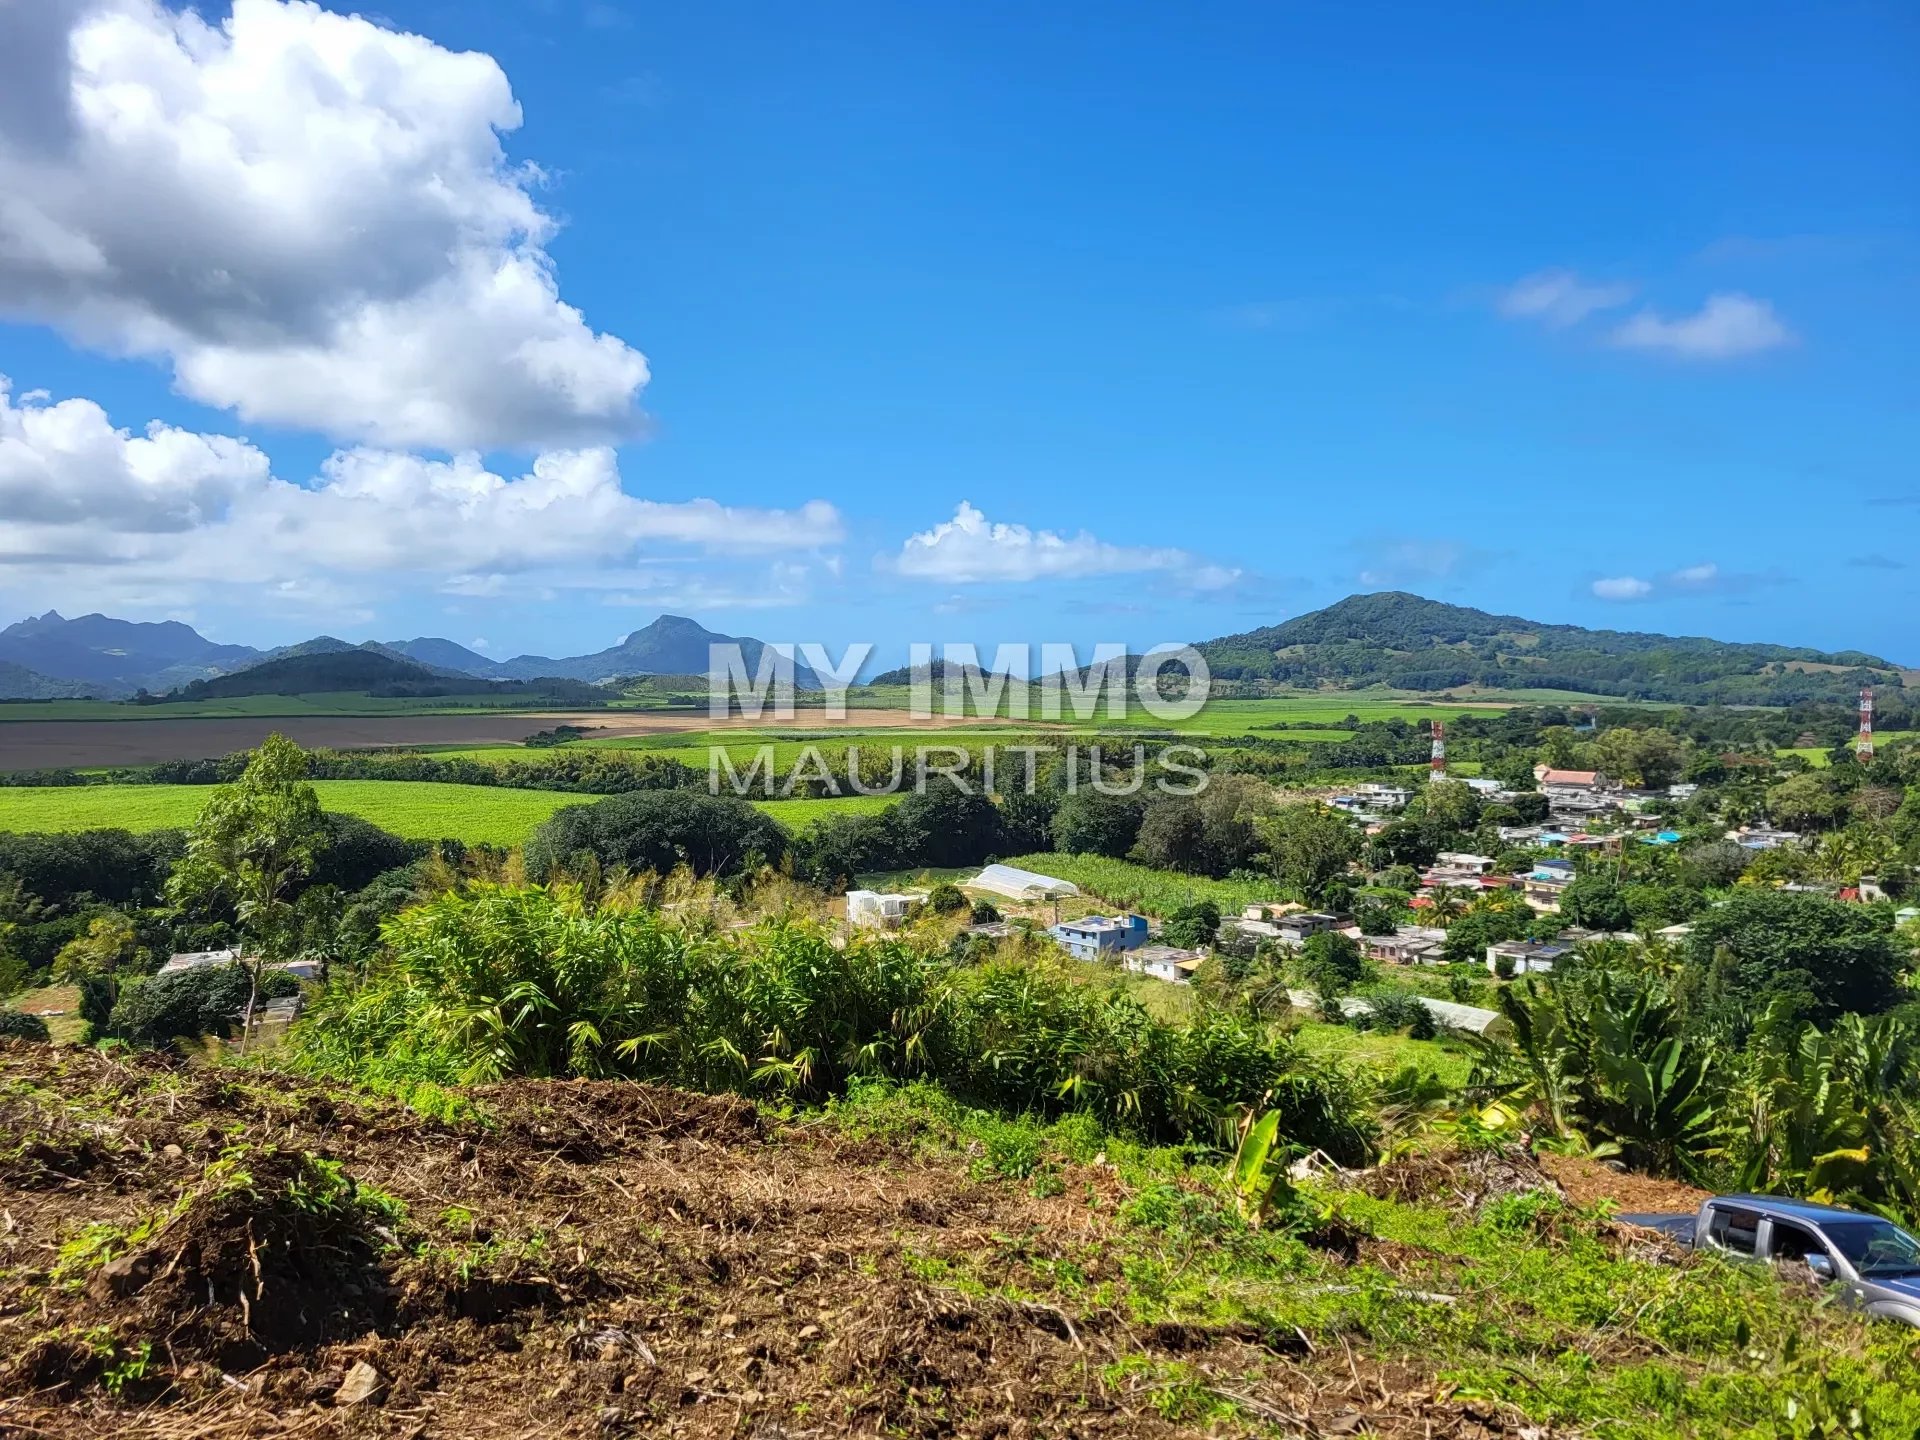 44614 m2 plot with exceptional view!